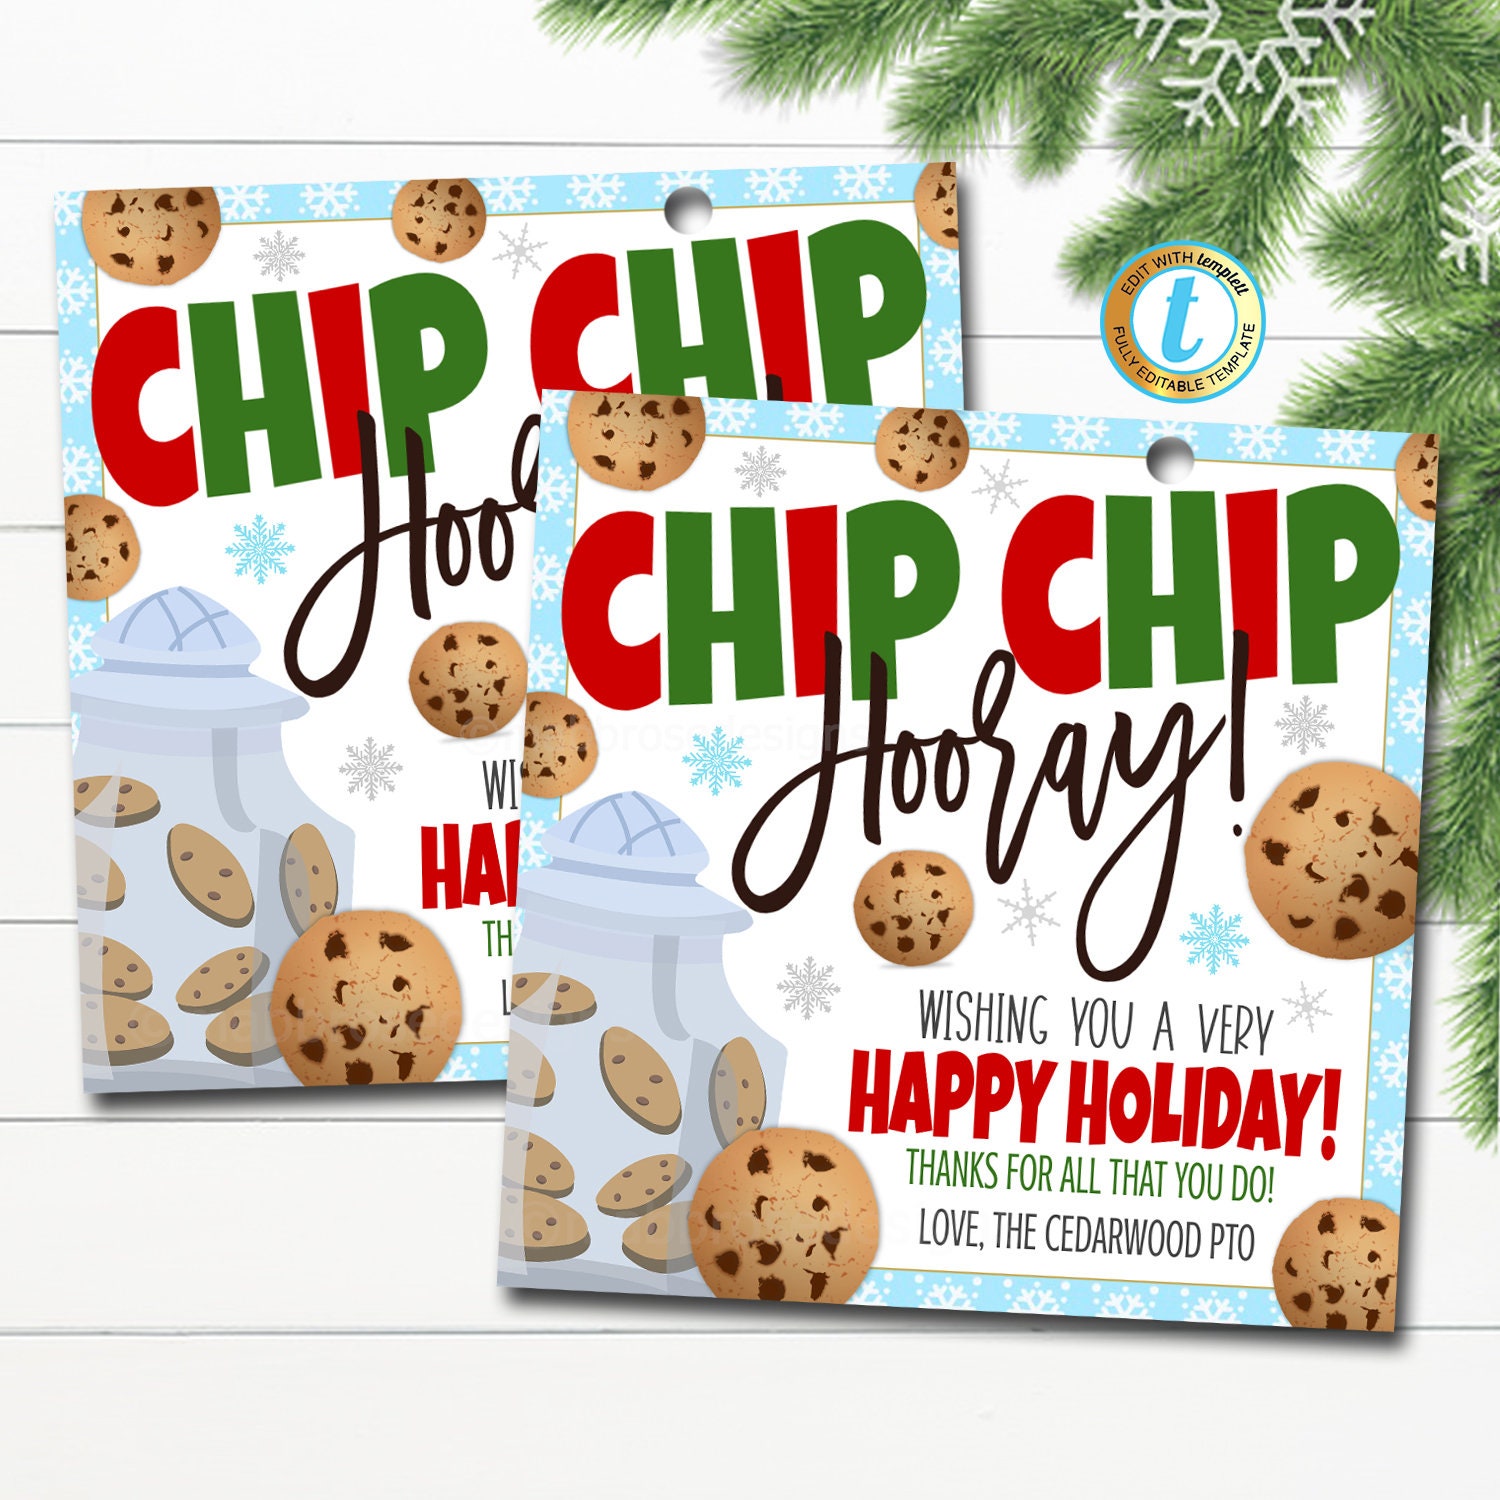 Kids Valentines Cards Friend-chip, Chip Hooray, Valentine Tags, Printable Valentines  Day, Kid Gifts for School Classroom Bag Chips Tags, 